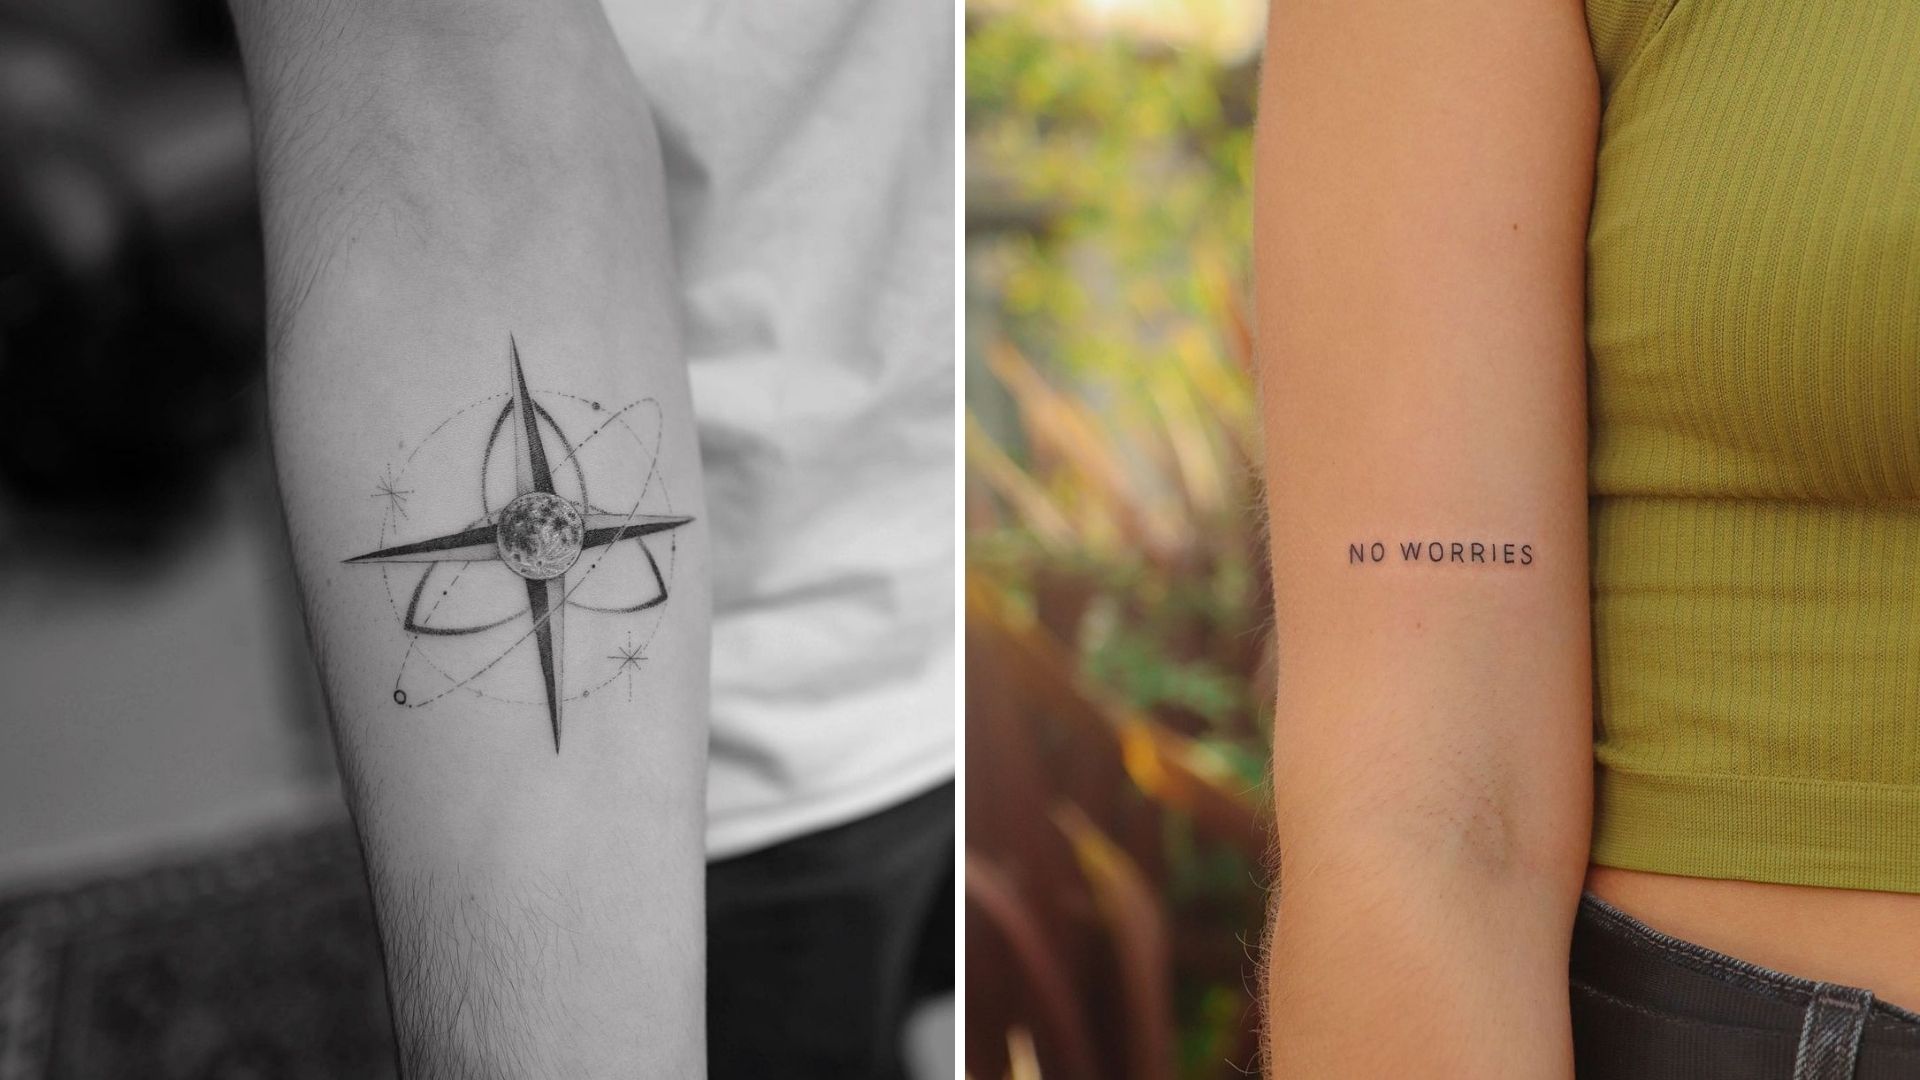 Mesmerizing Inner Strength Tattoos For Women to Serve As a Reminder Daily   in Tough Times  Fashionisers